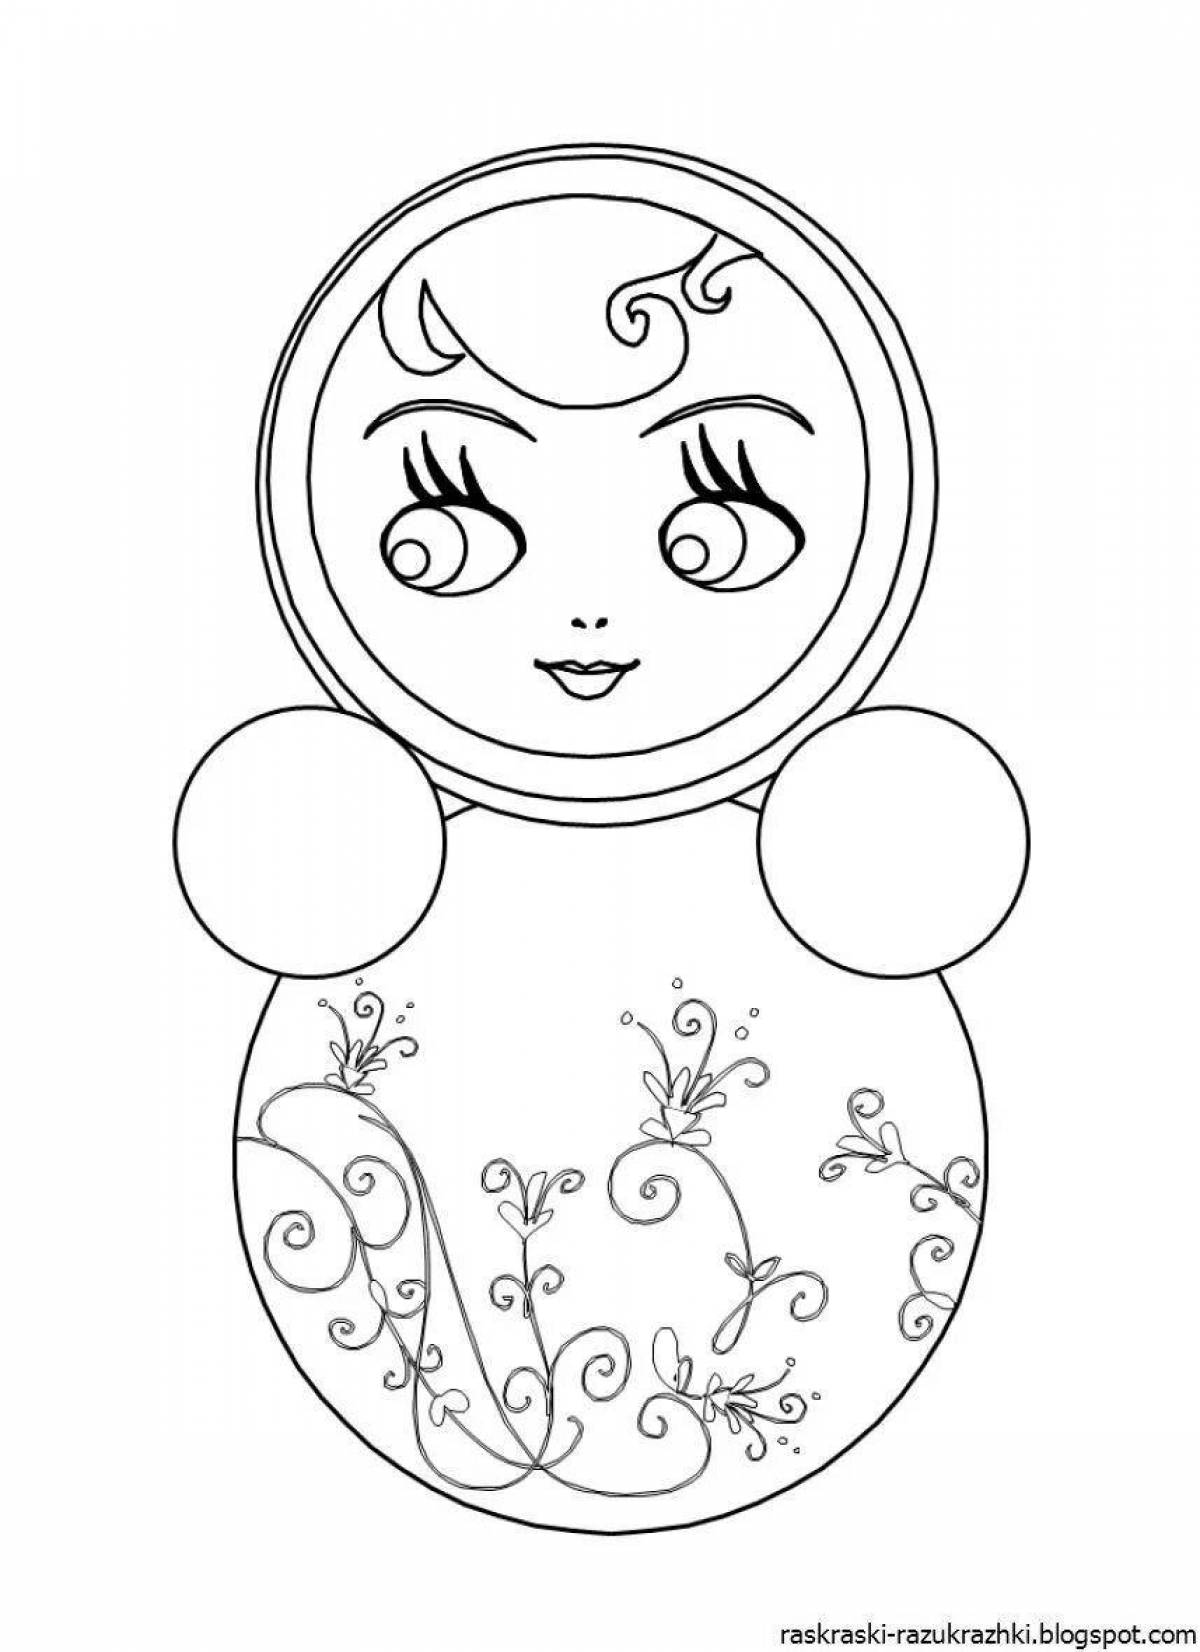 Adorable glass coloring book for kids